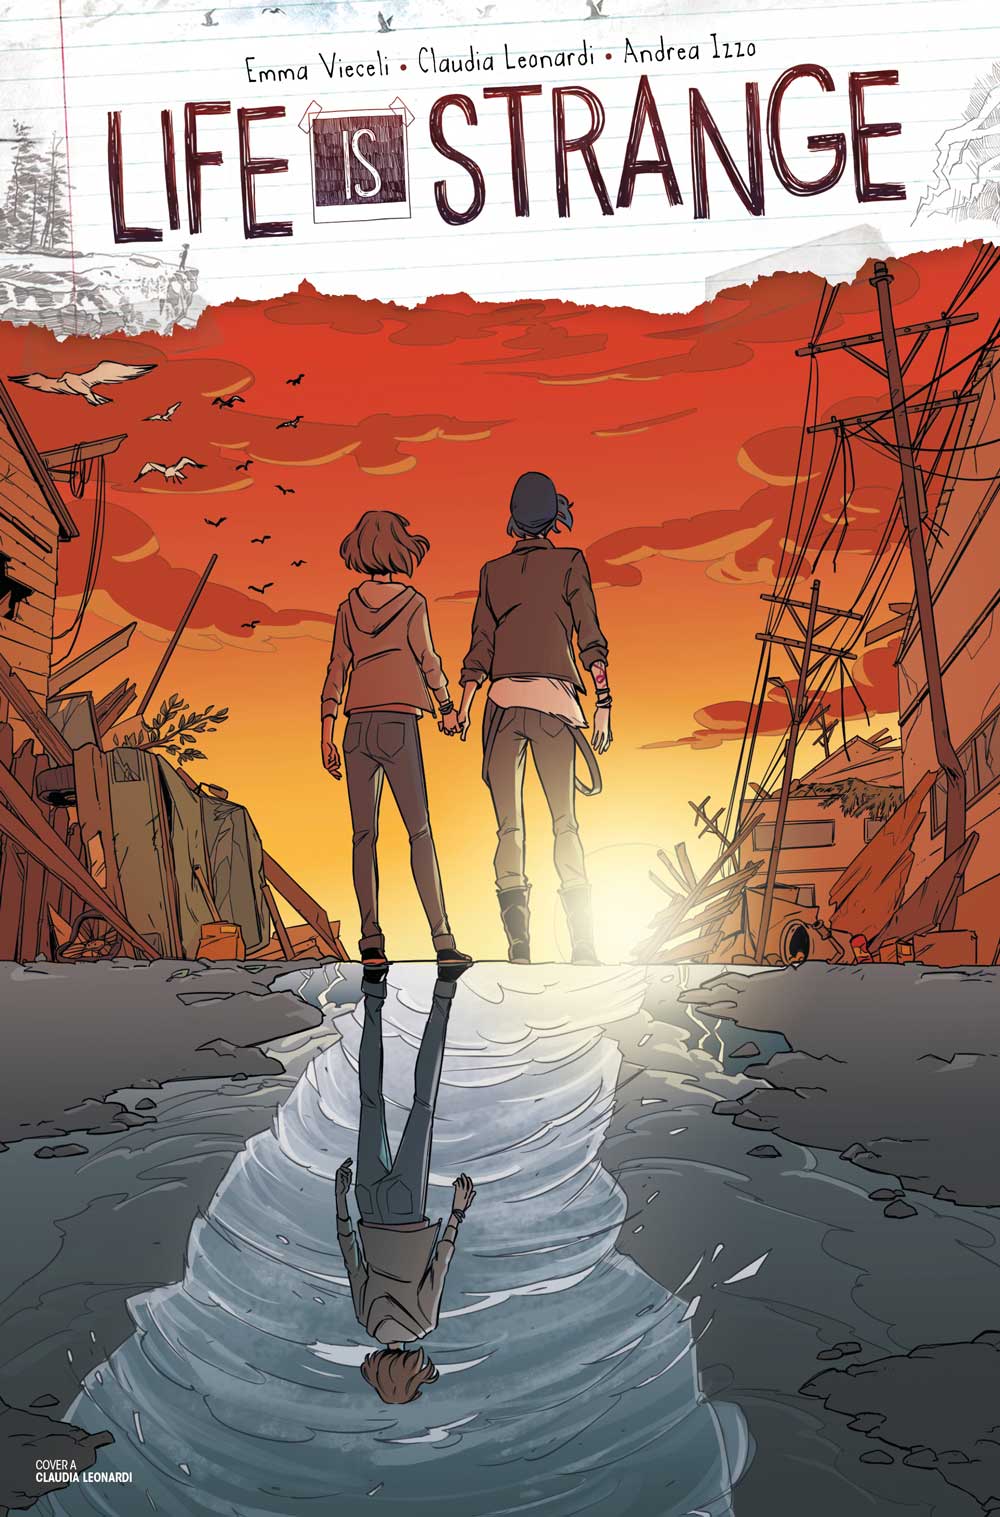 Life is Strange #1 Review